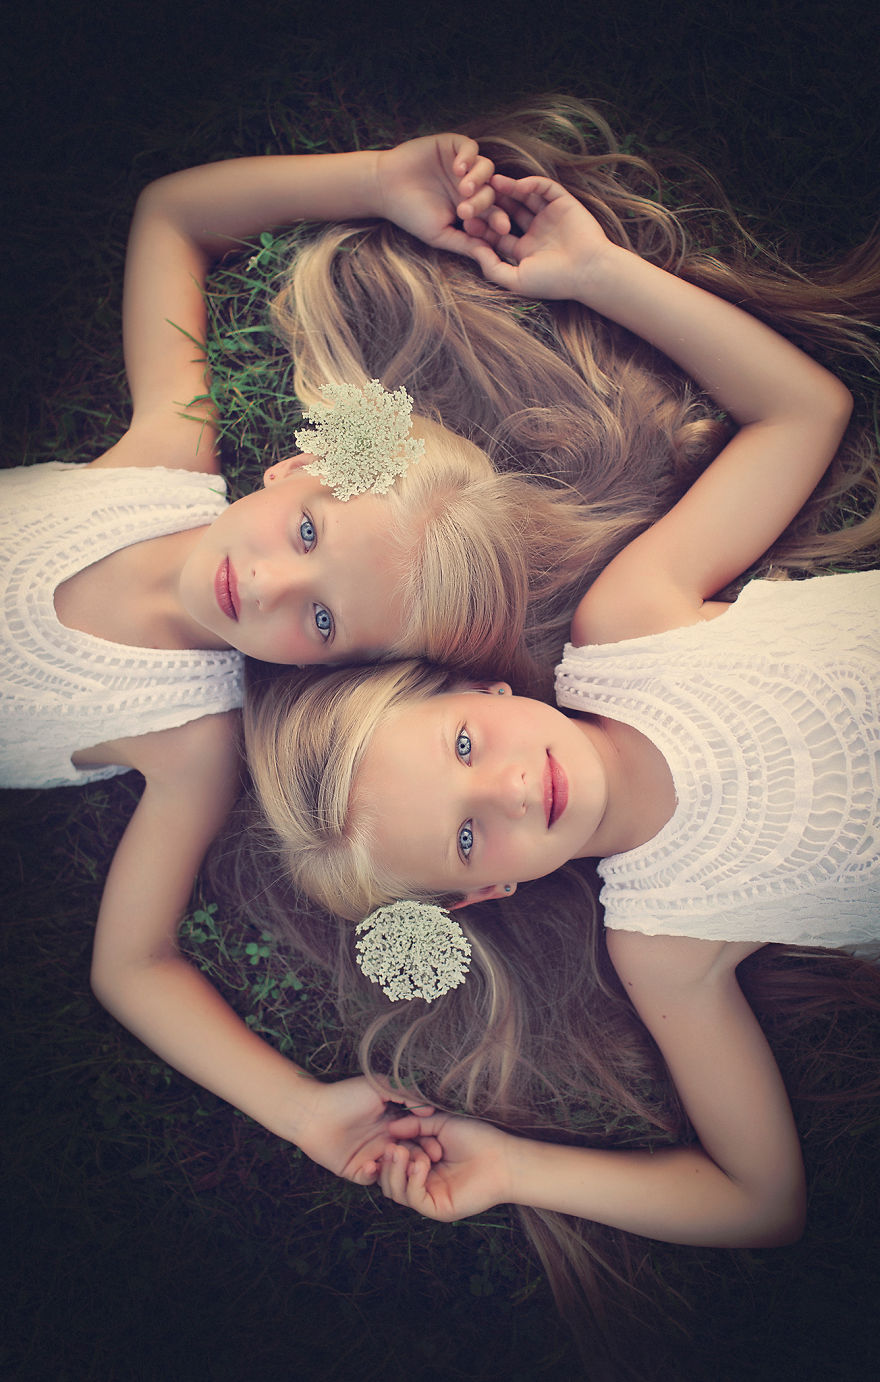 I Photograph Twins, And This Project Has A Special Place In My Heart